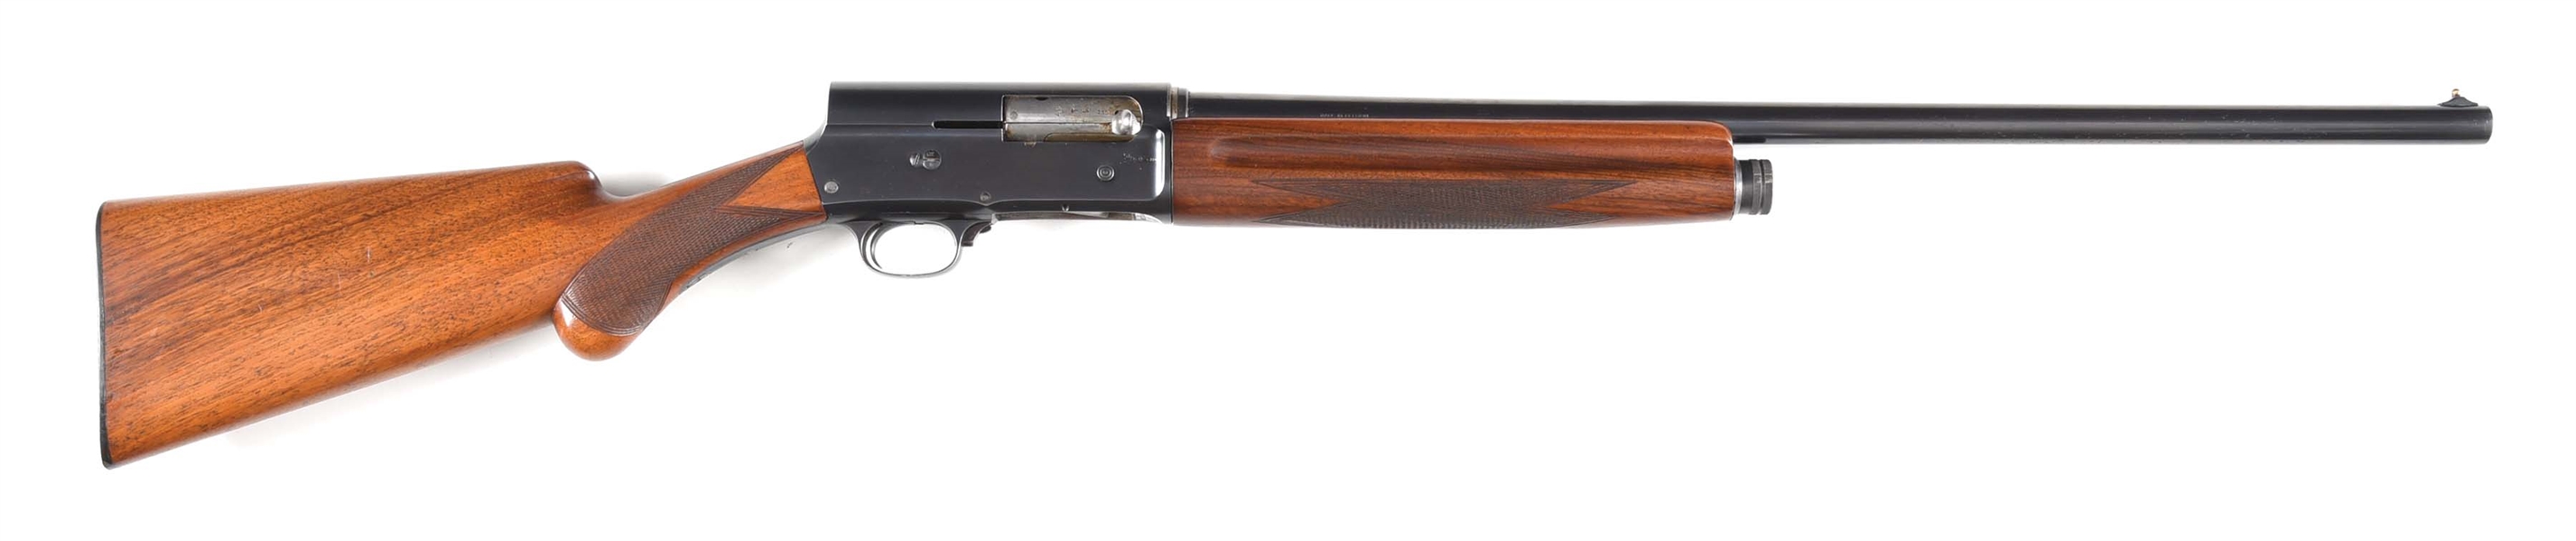 (C) BROWNING A5 SEMI-AUTOMATIC SHOTGUN MADE IN BELGIUM BY FN.